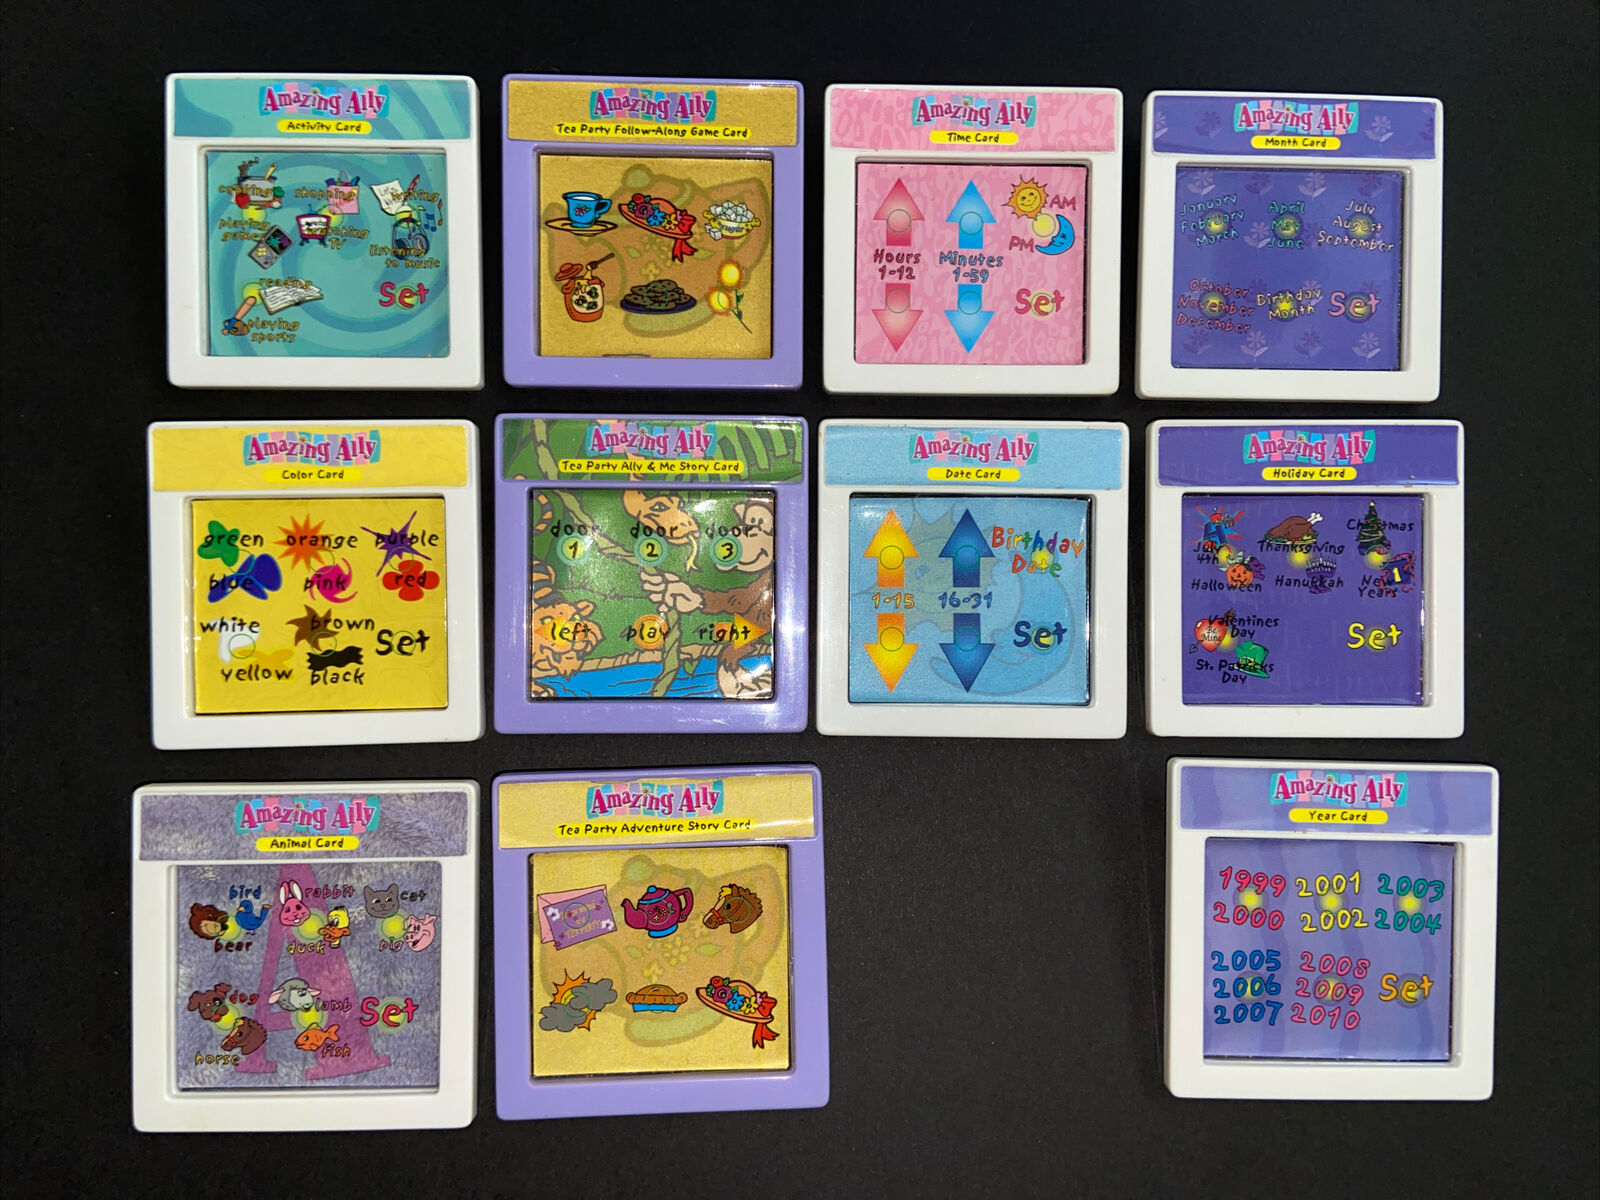 11 Playmates Amazing Ally Doll Interactive Book Cards Cartridges Games